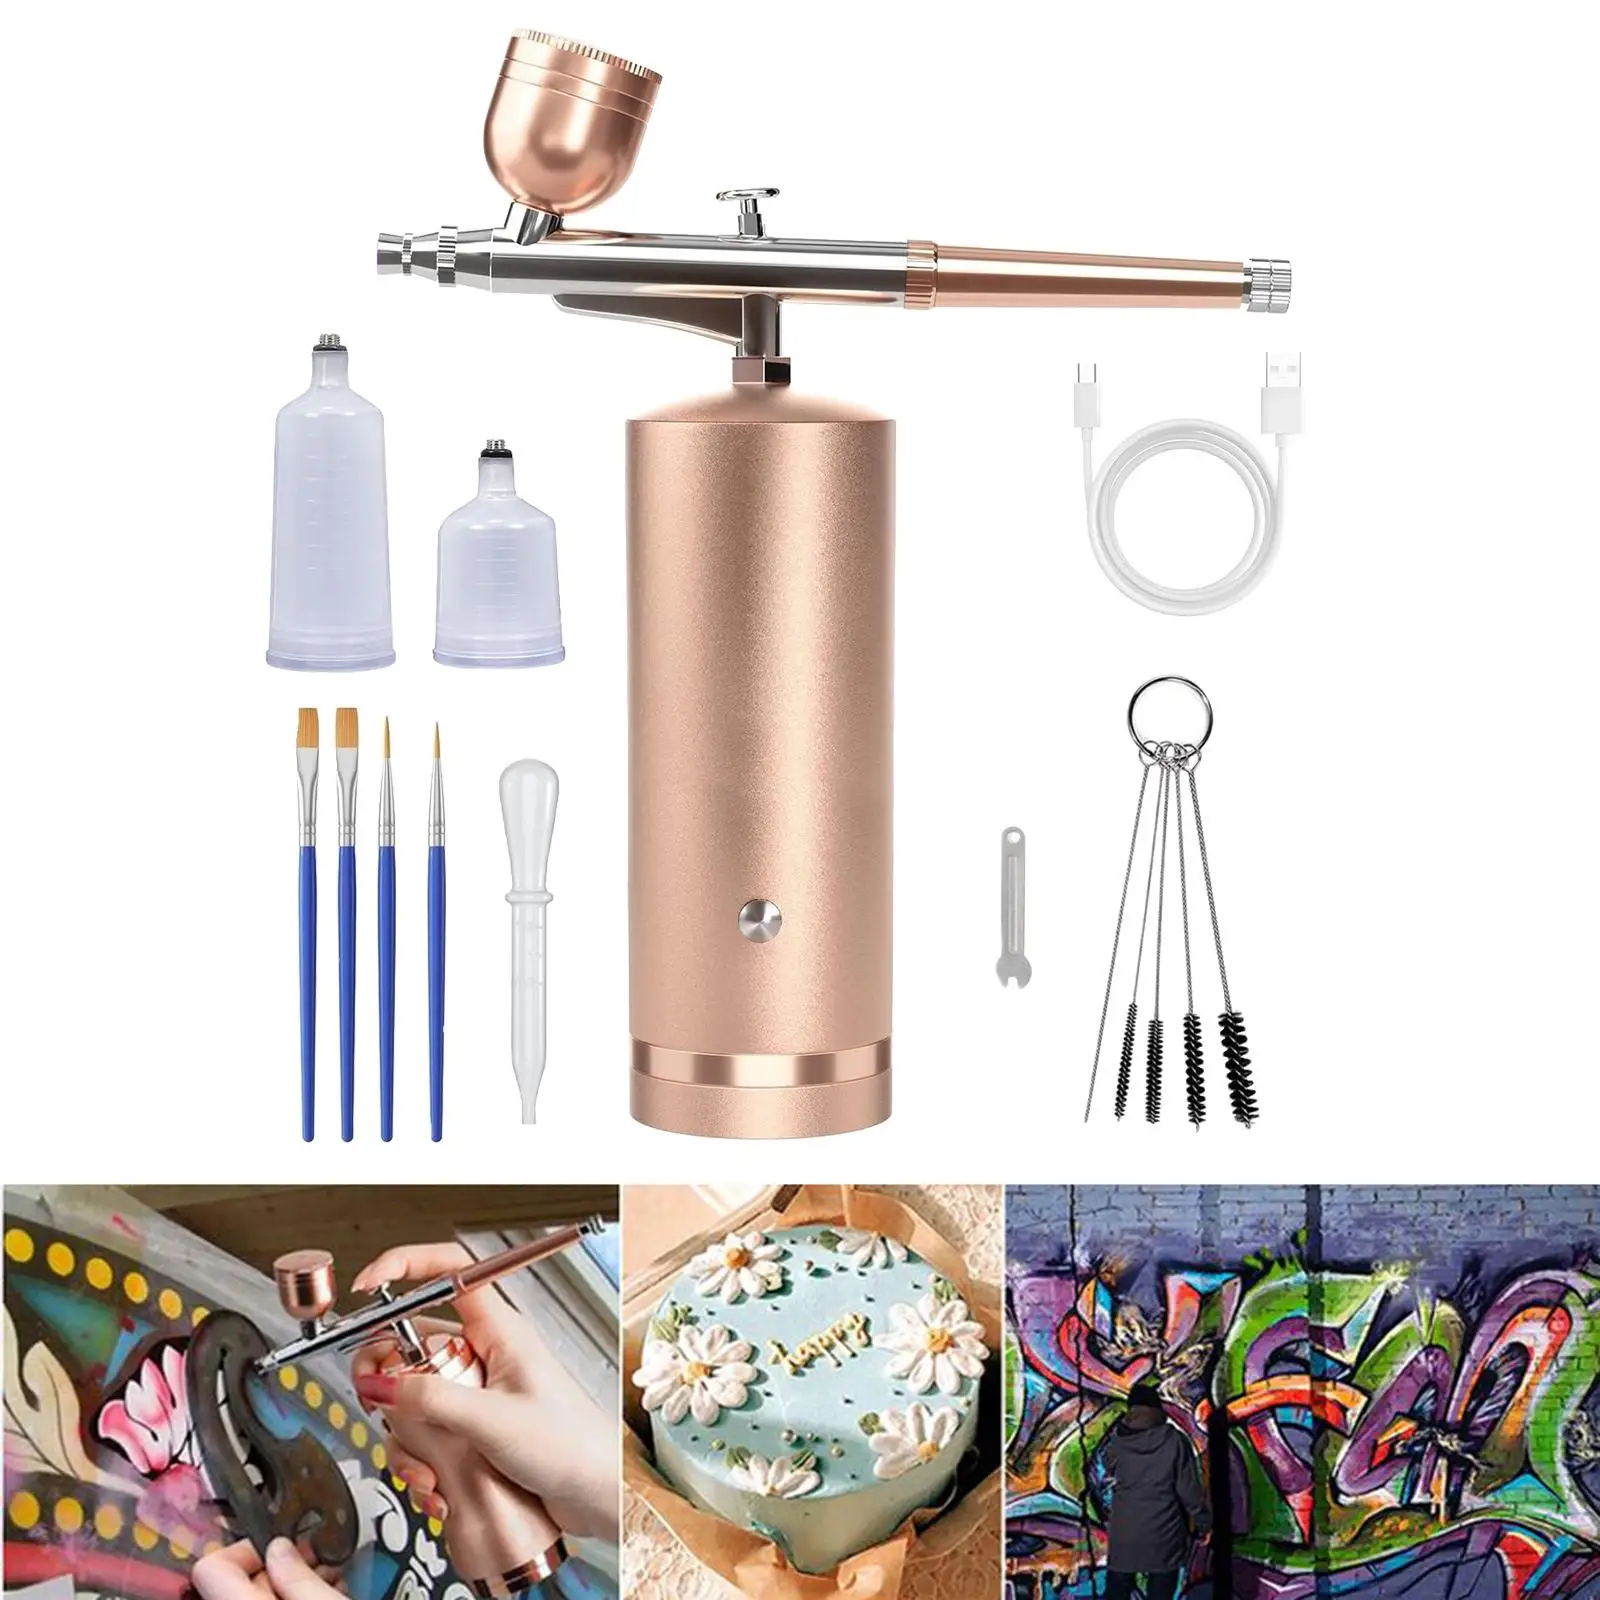 Airbrush Set 48 PSI and Cleaning Brush Set Cake Airbrush Decorating for Cakes Decor Model Coloring Clothes Coloring Makeup Craft